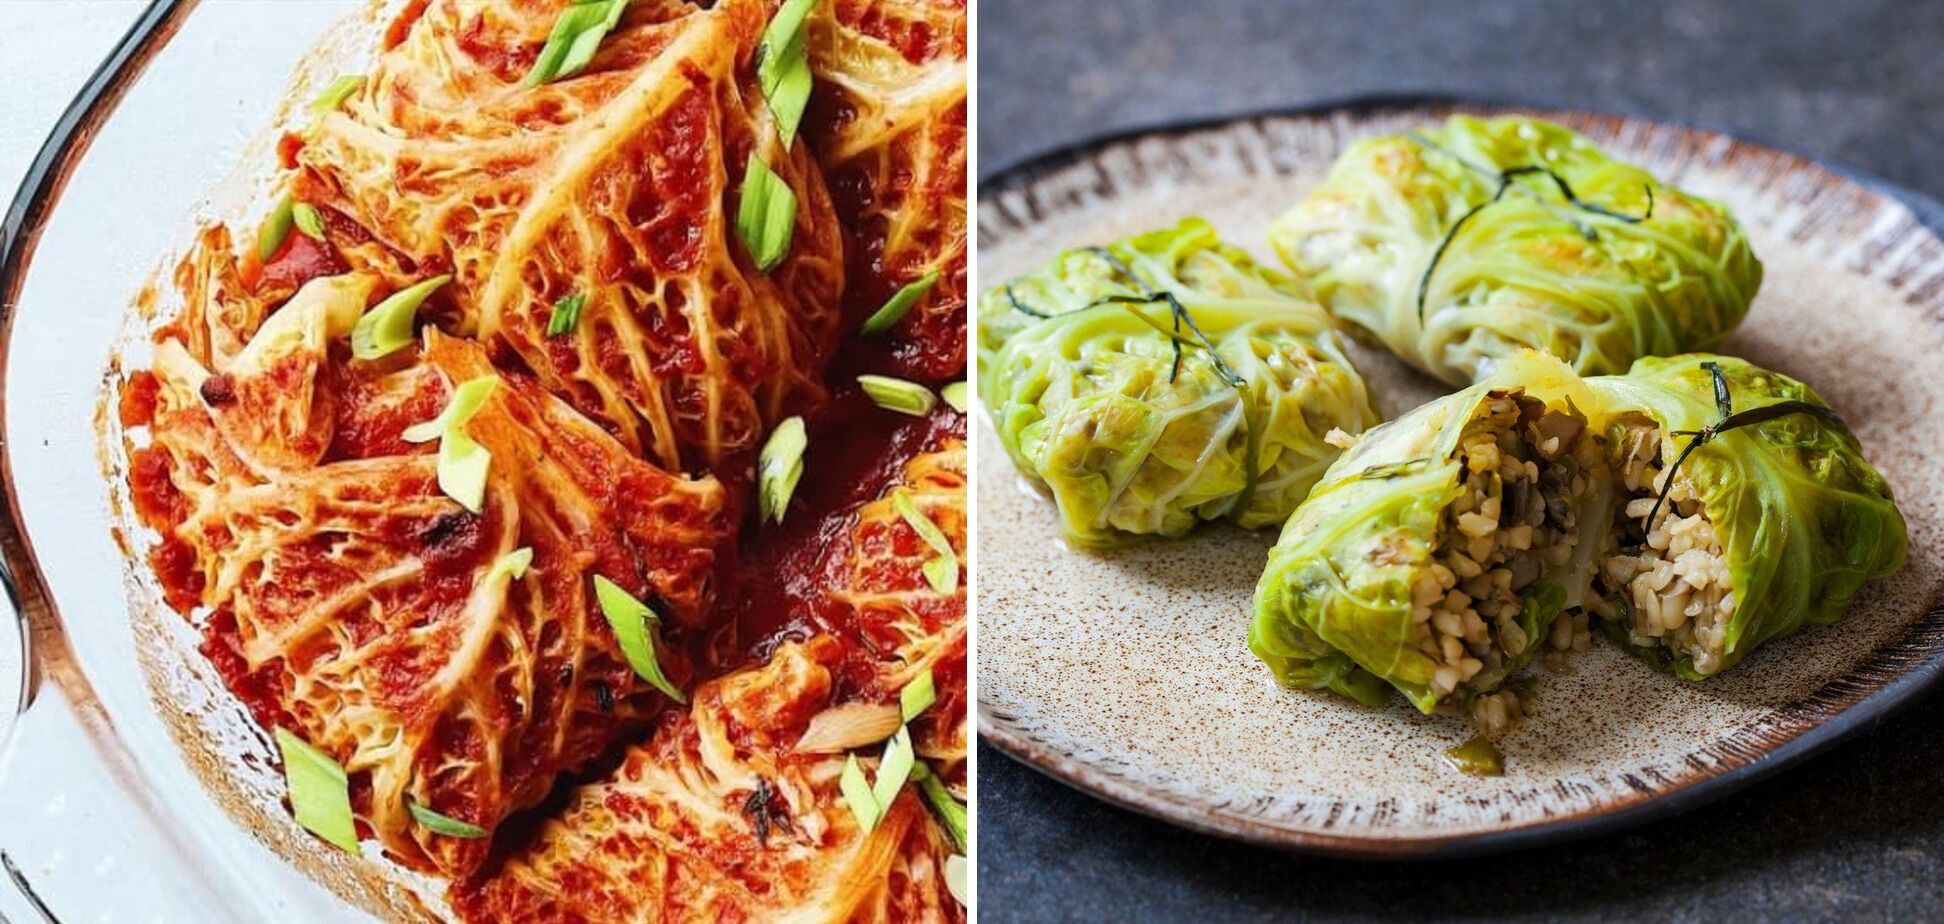 Cabbage rolls from Chinese cabbage